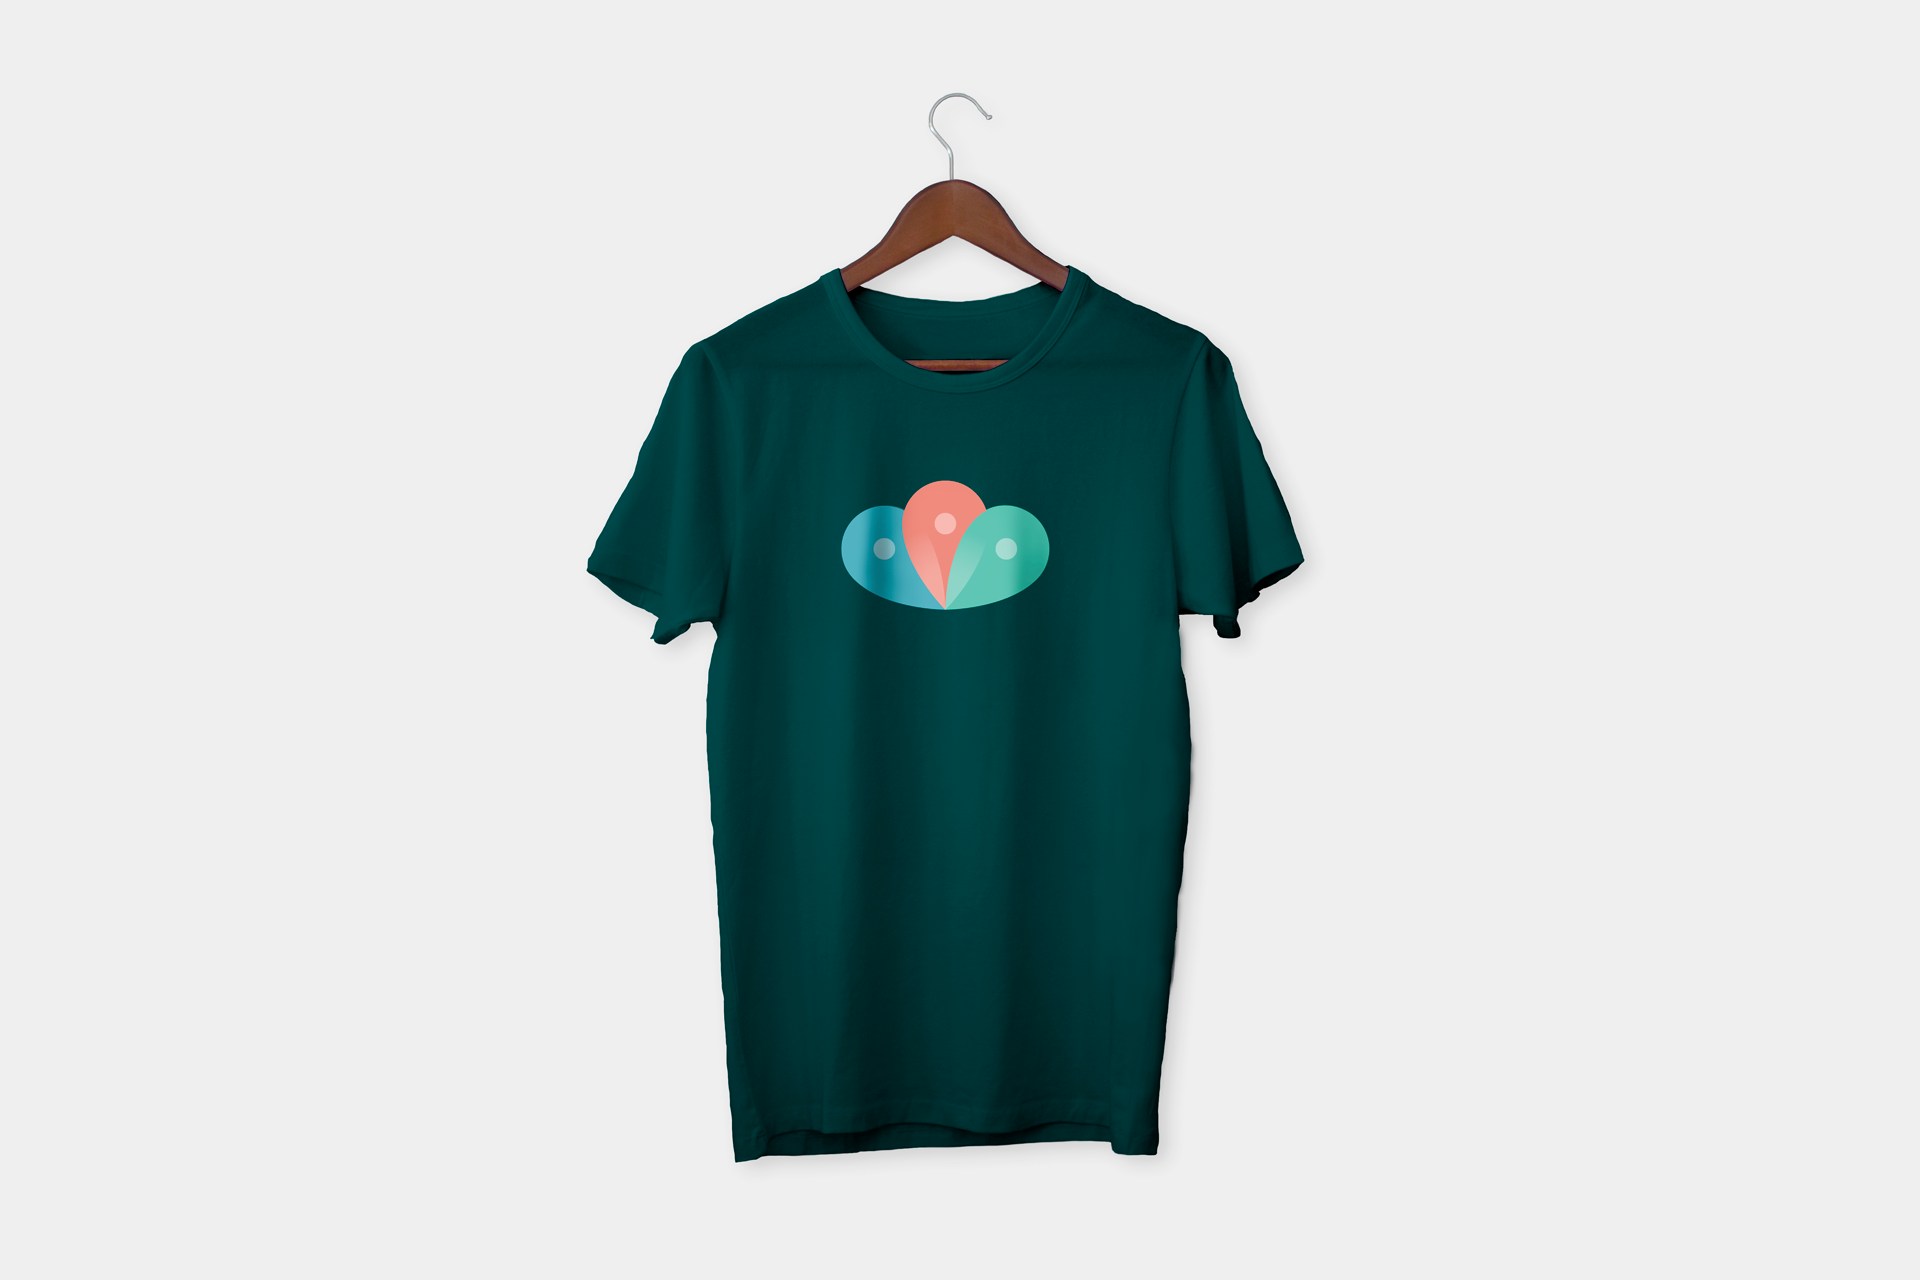 T-shirt mockup. Forest green t-shirt with the Wonderproxy Pin cloud icon in the center.